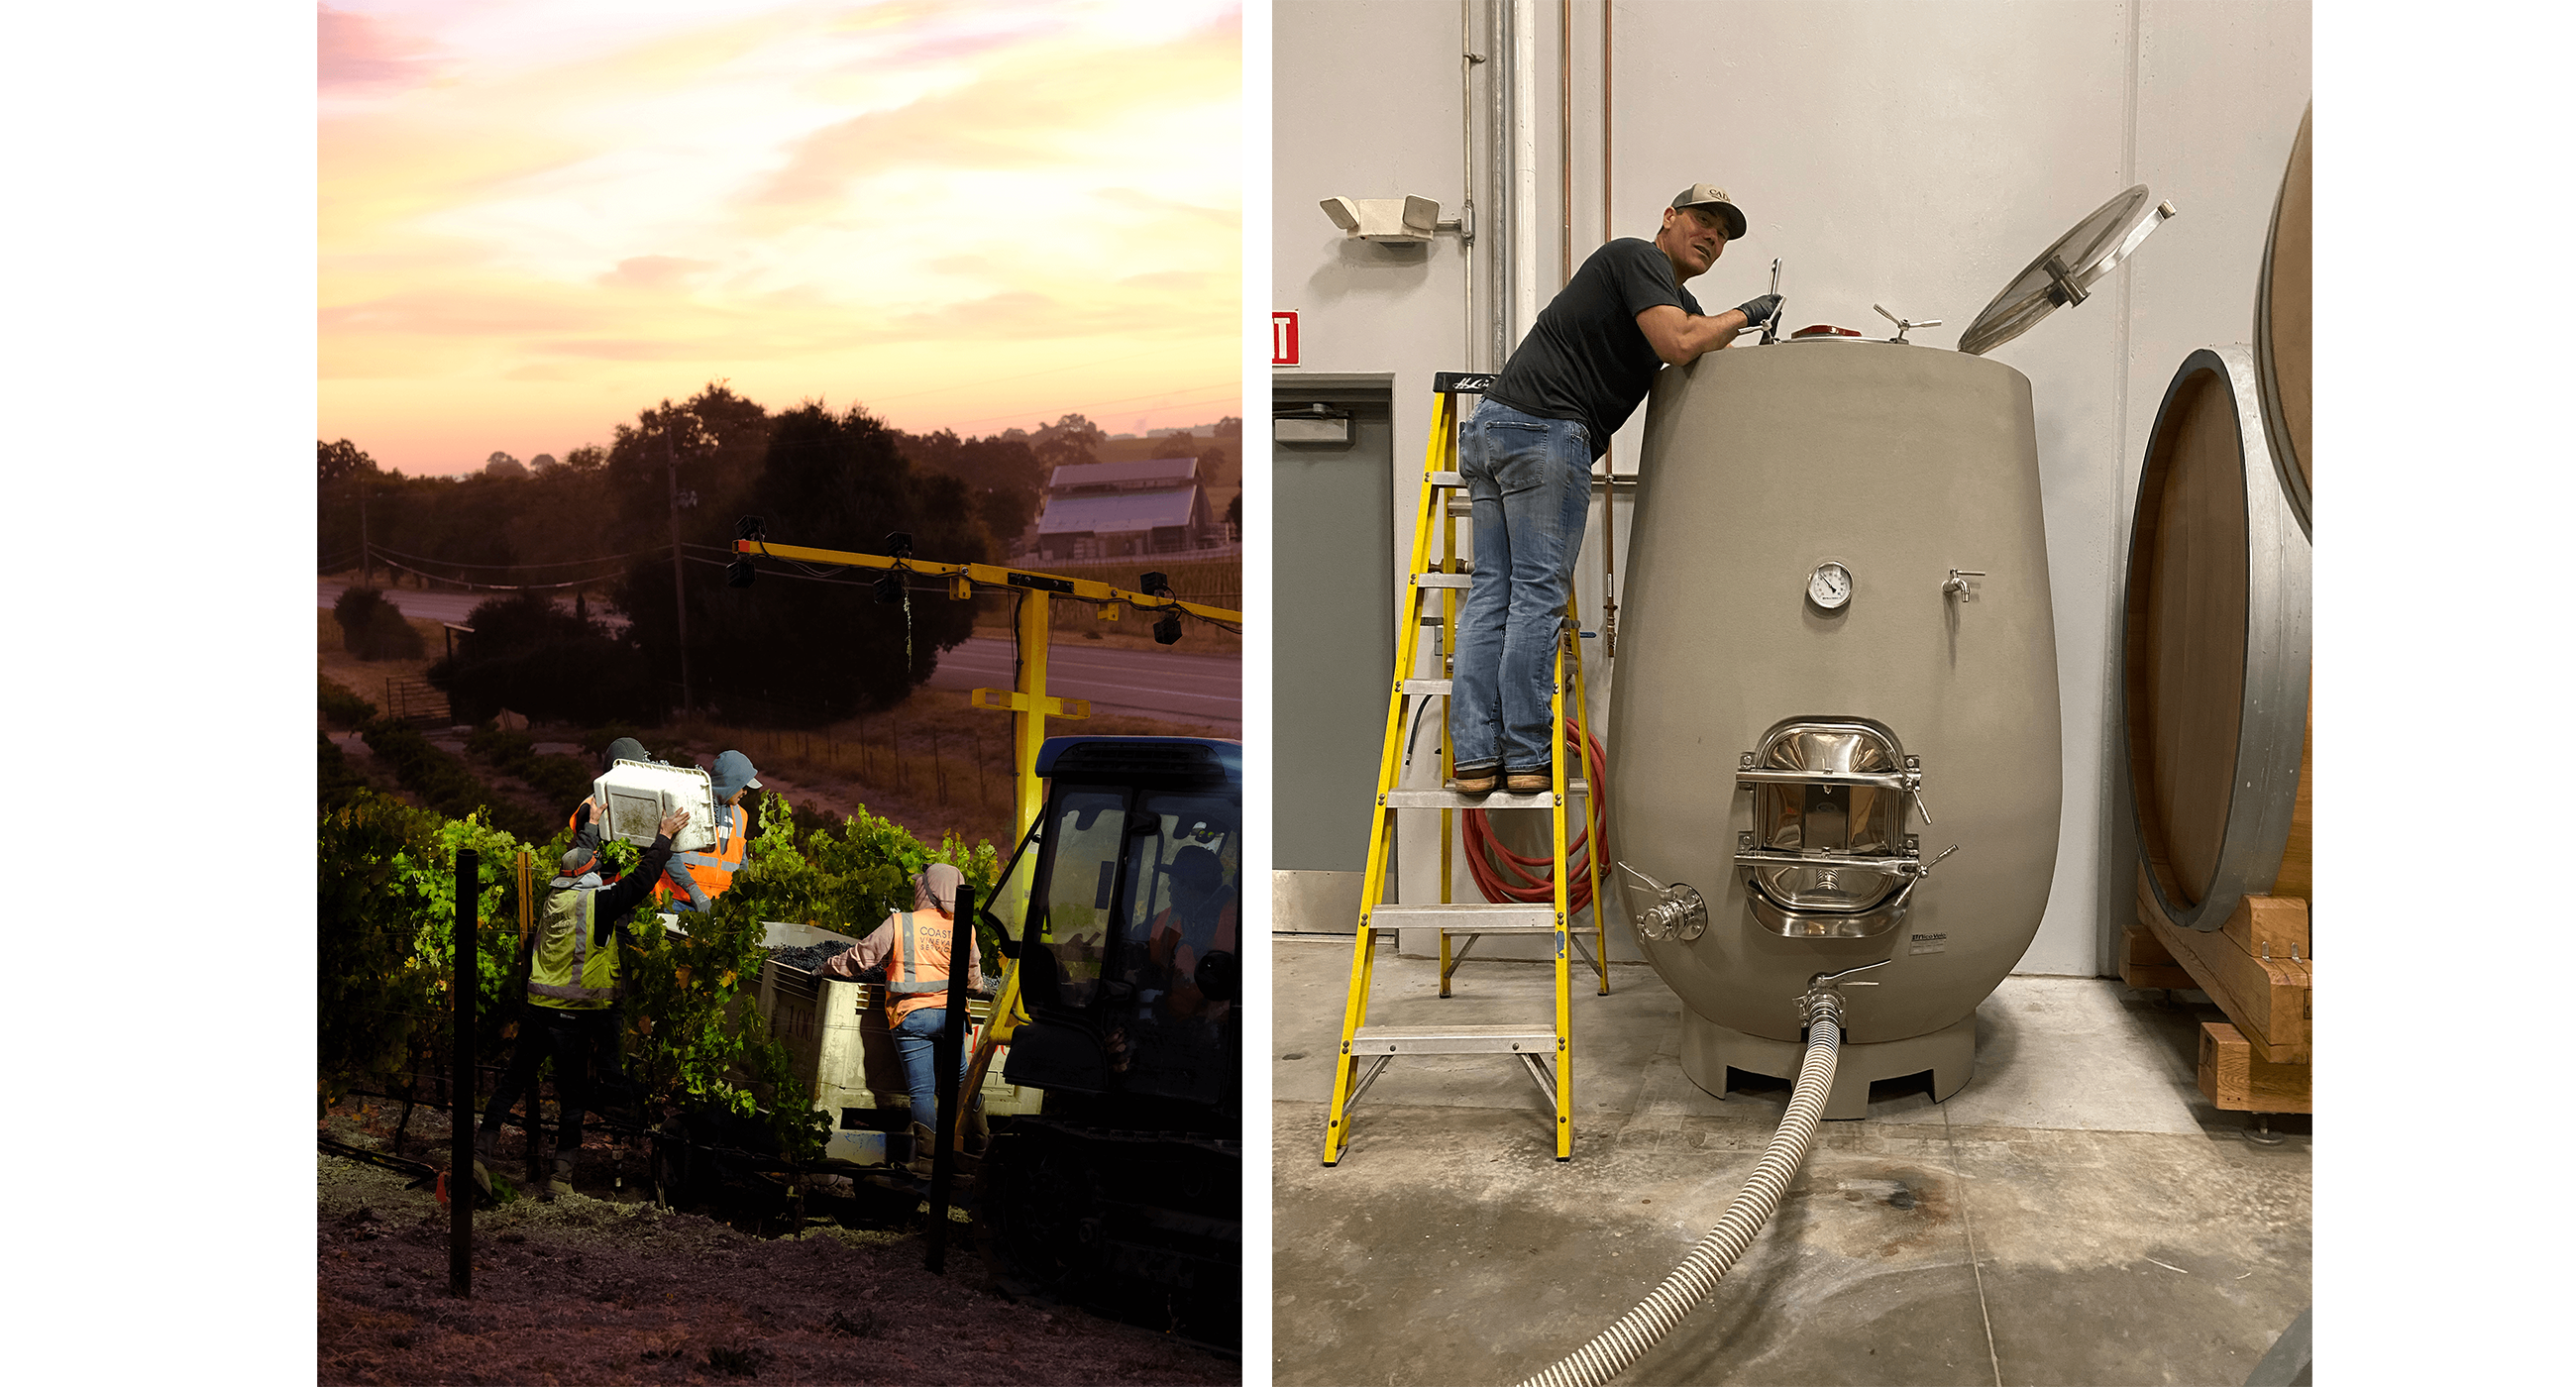 On the left, a crew of vineyard workers gets ready to harvest grapes in the early morning. On the right, a dark grey concrete tank is being inspected by our Winemaker.